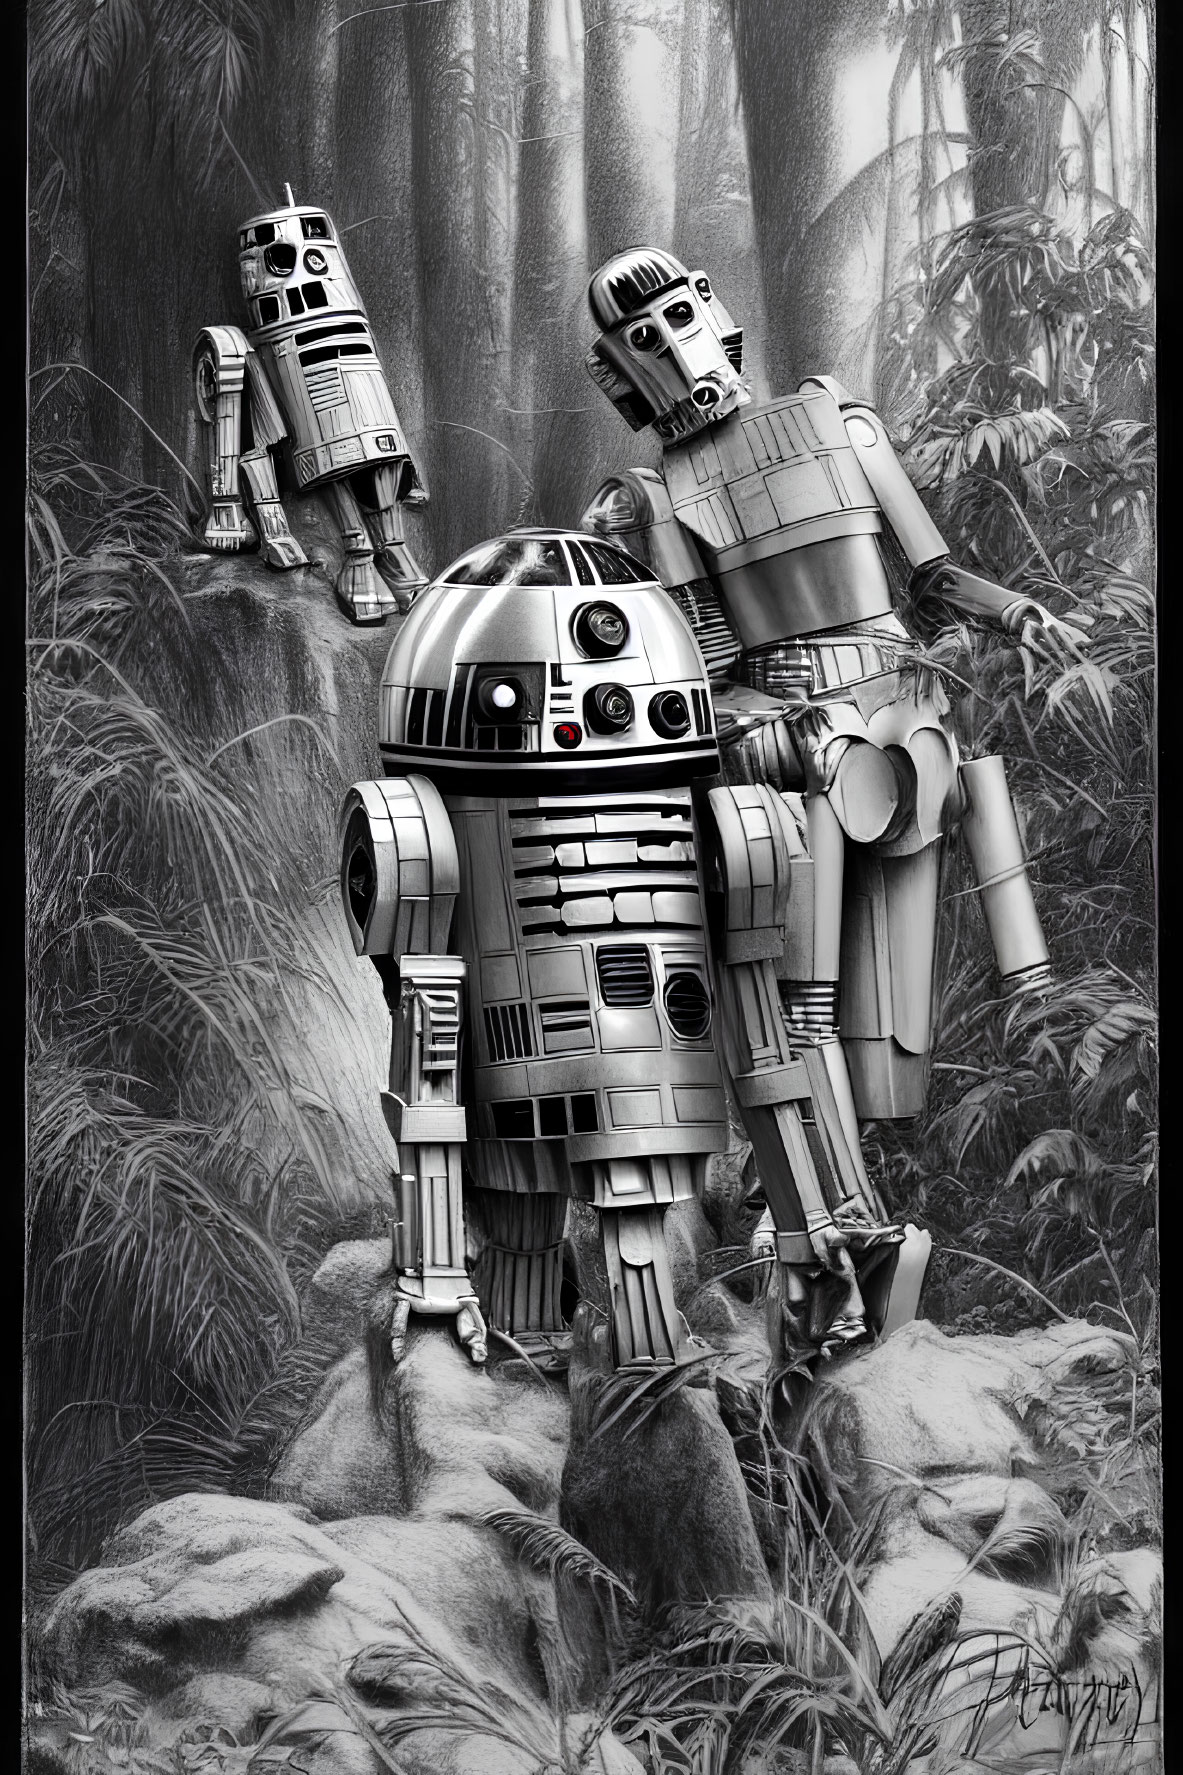 Monochromatic droids in dense forest setting